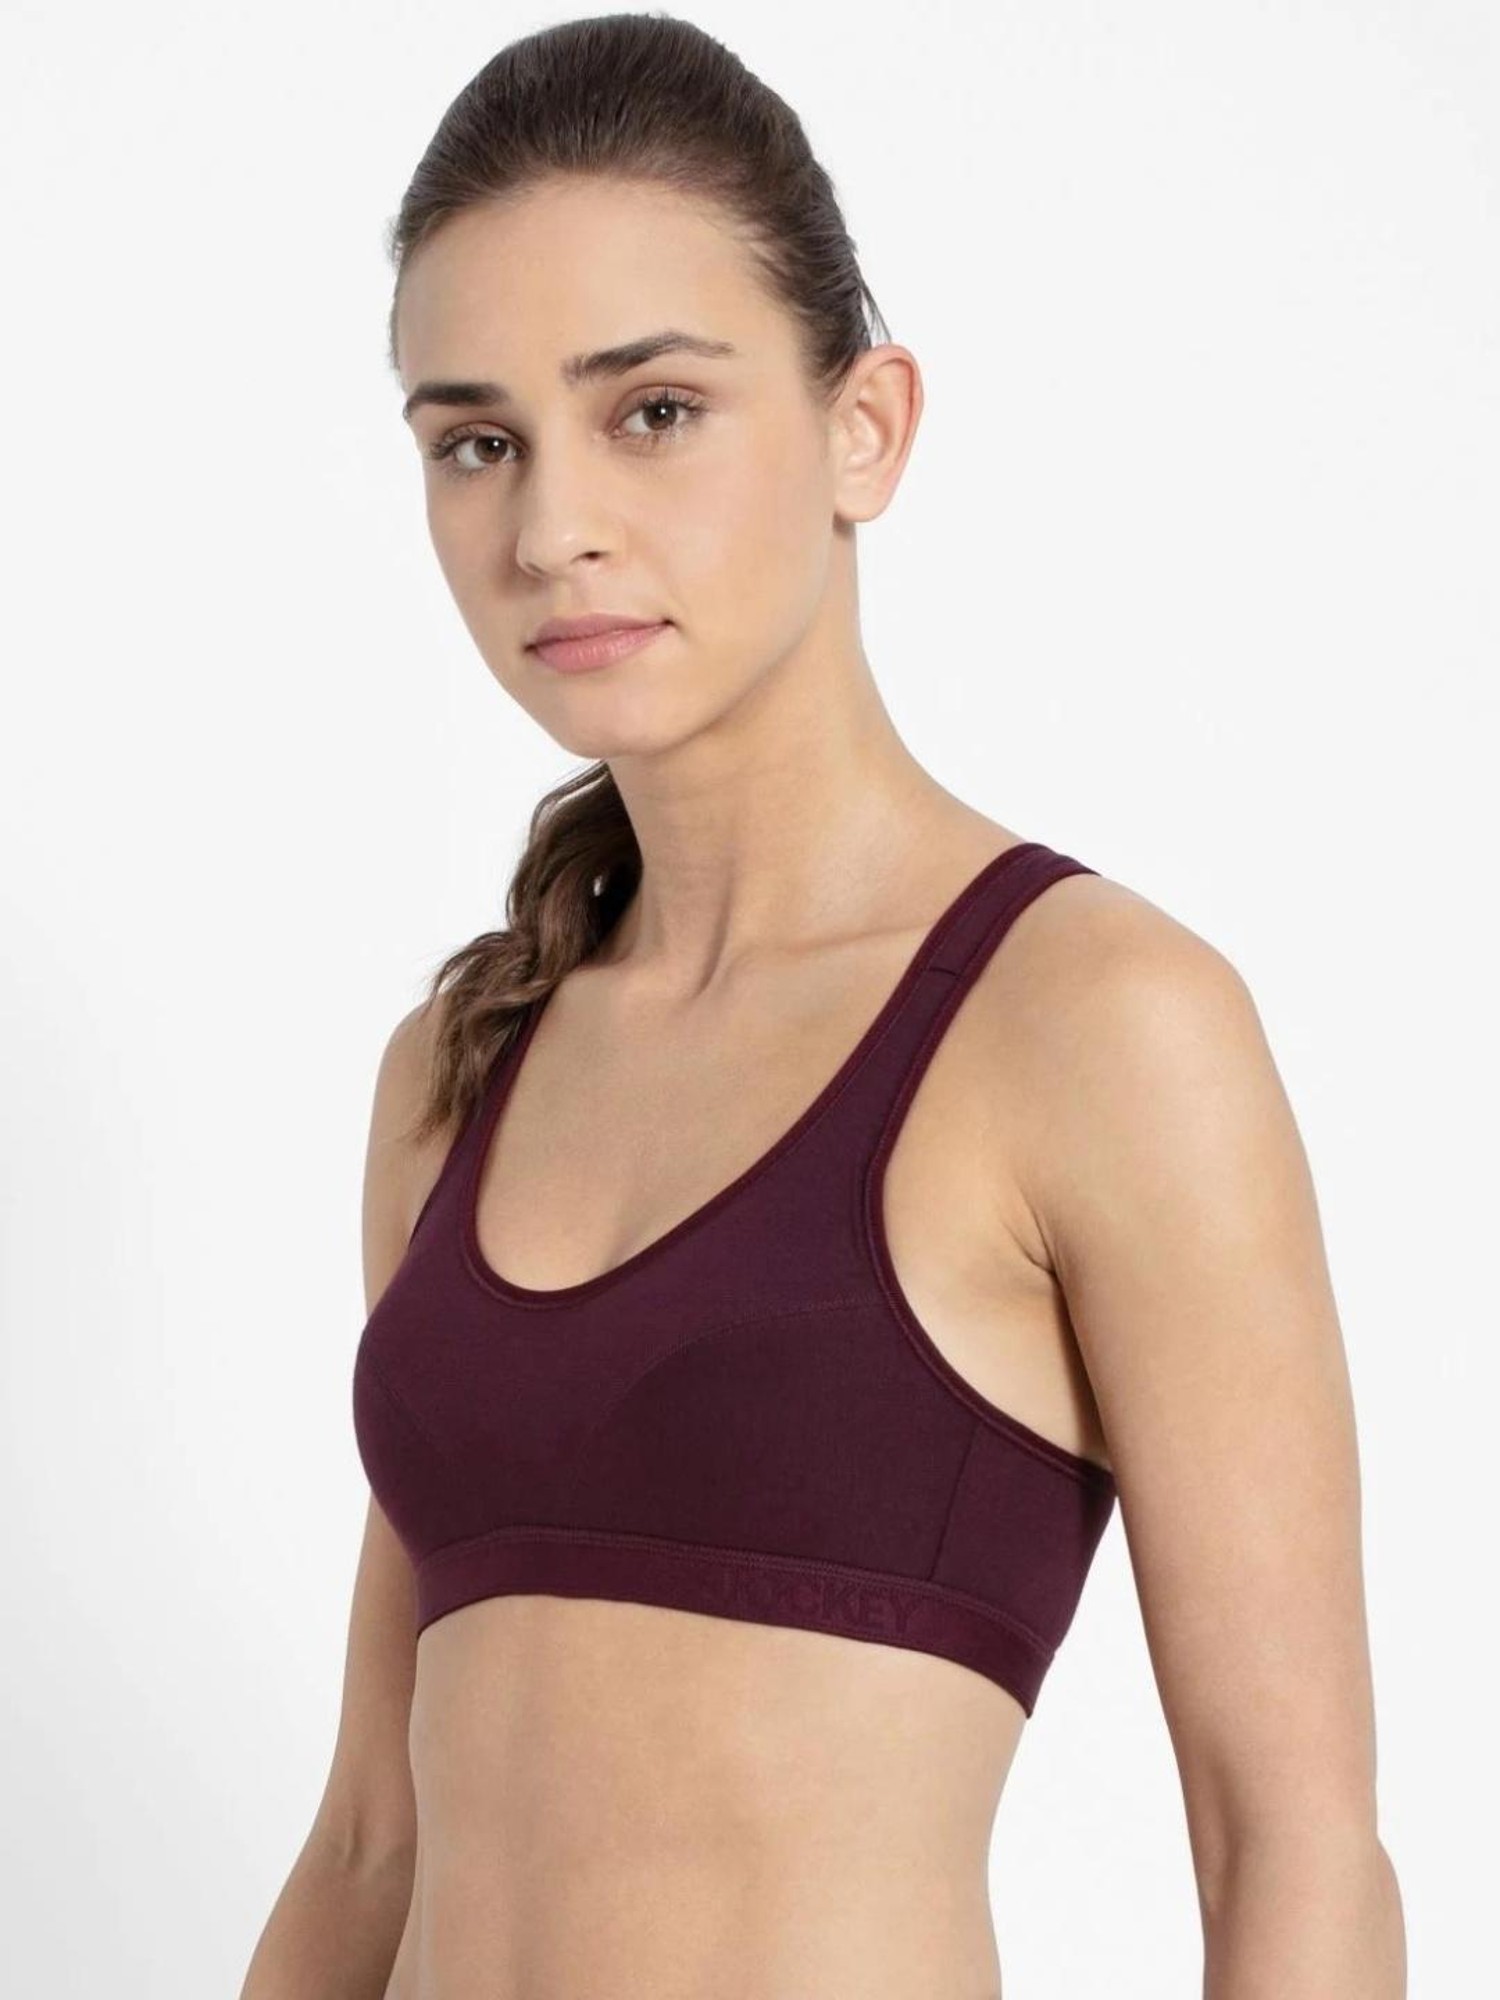 Lace Legacy Padded Wired Full Cover T-Shirt Bra - Burgundy Wine